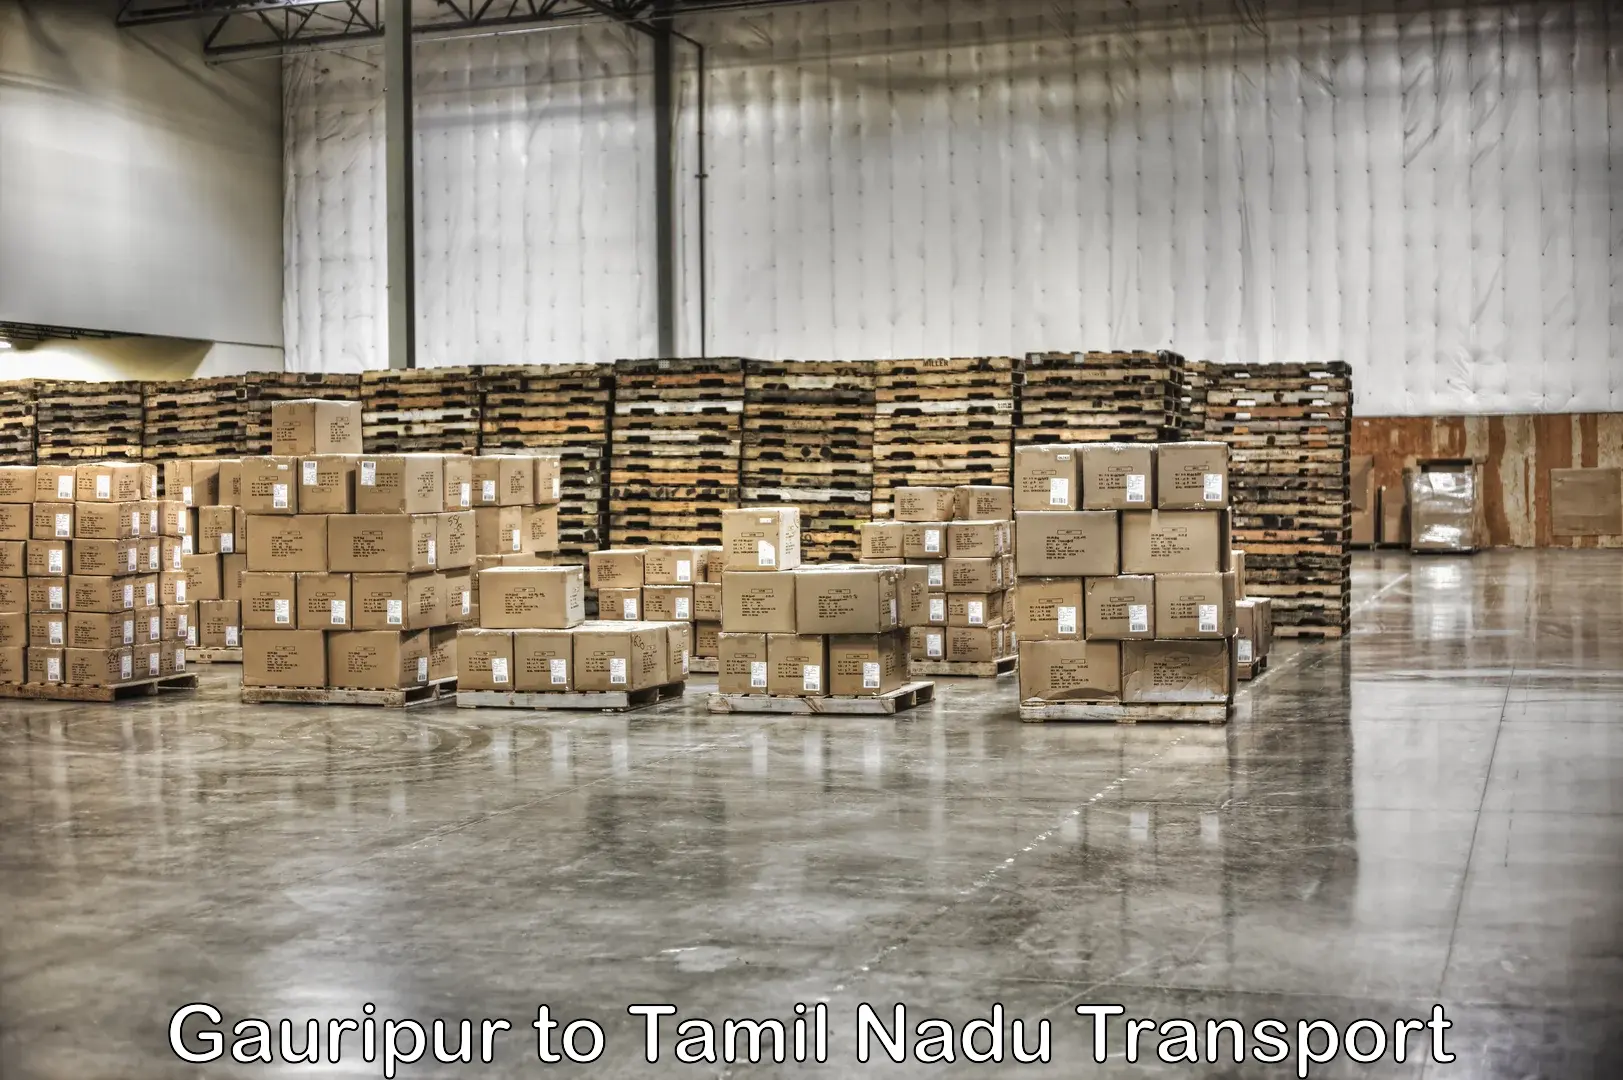 Truck transport companies in India Gauripur to Chennai